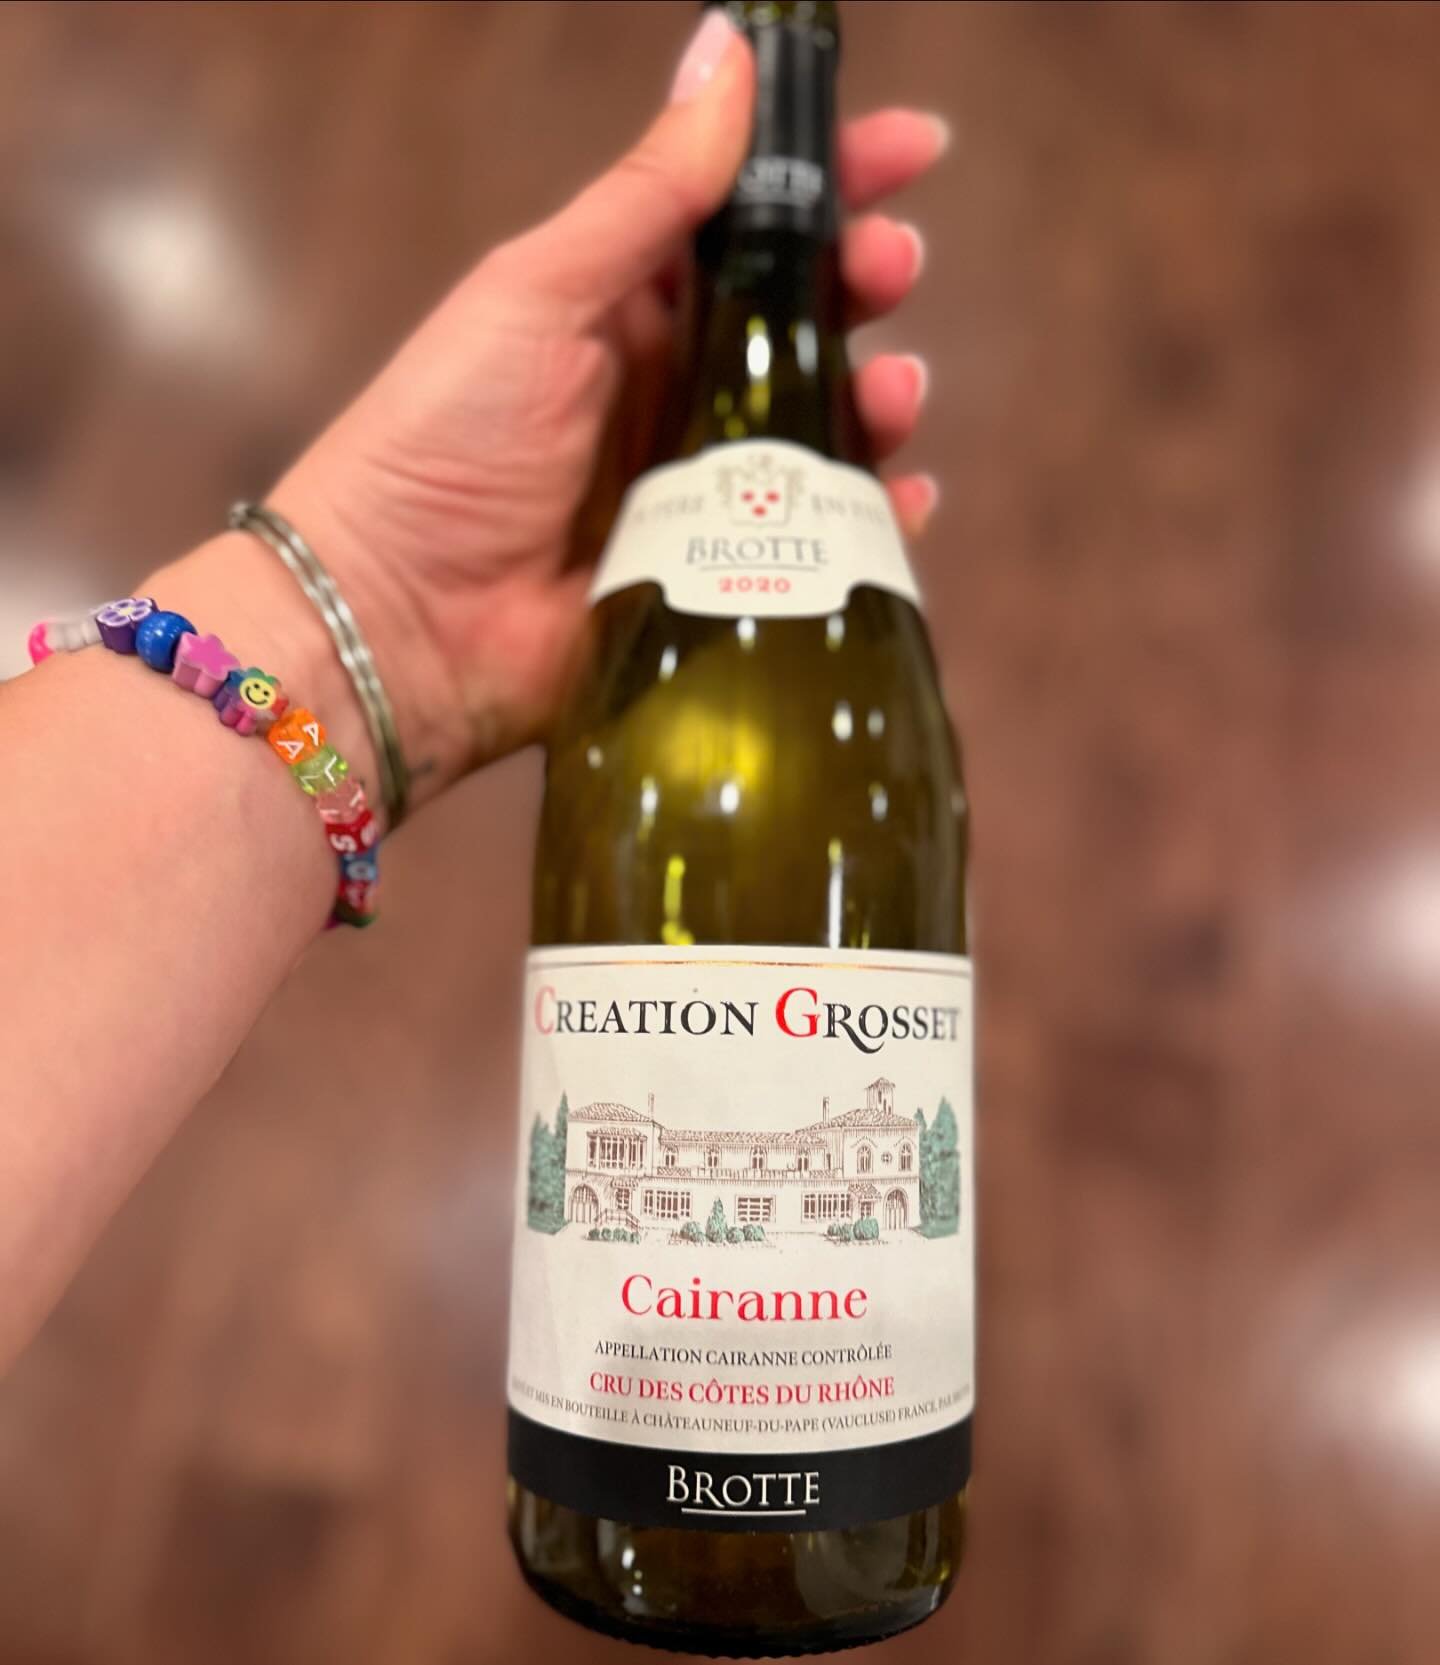 🍷Cairanne🍷
Some fun facts about Cairanne, if you&rsquo;ve never heard of it or tried its wines. (This was my first.) Cairanne is a wine region in the southern Rh&ocirc;ne Valley in France. According to the Oxford Companion to Wine, Cairanne is &ldq